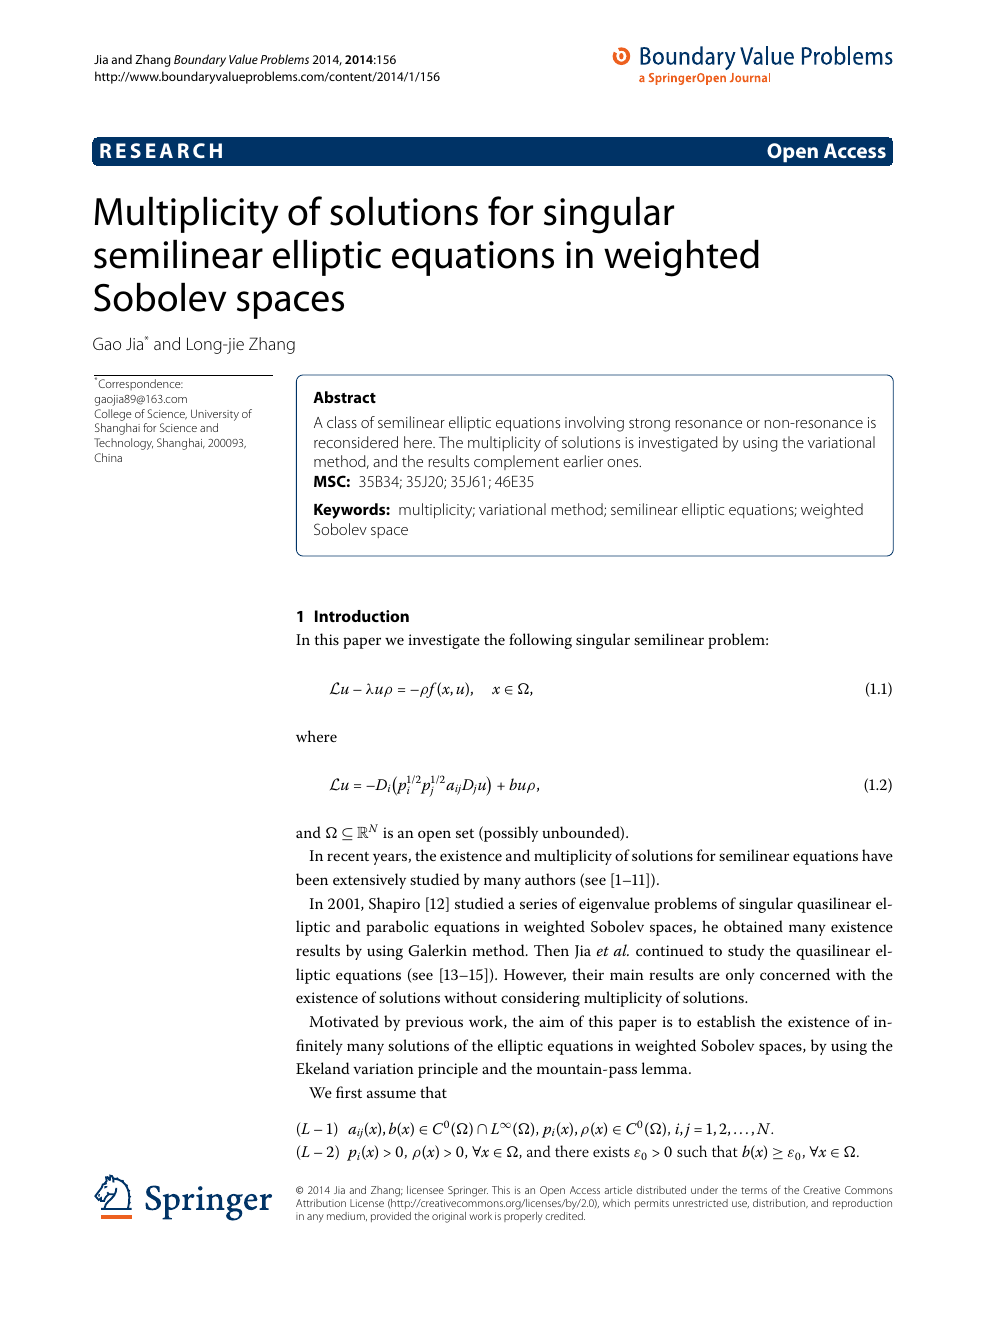 Multiplicity Of Solutions For Singular Semilinear Elliptic Equations In Weighted Sobolev Spaces Topic Of Research Paper In Mathematics Download Scholarly Article Pdf And Read For Free On Cyberleninka Open Science Hub